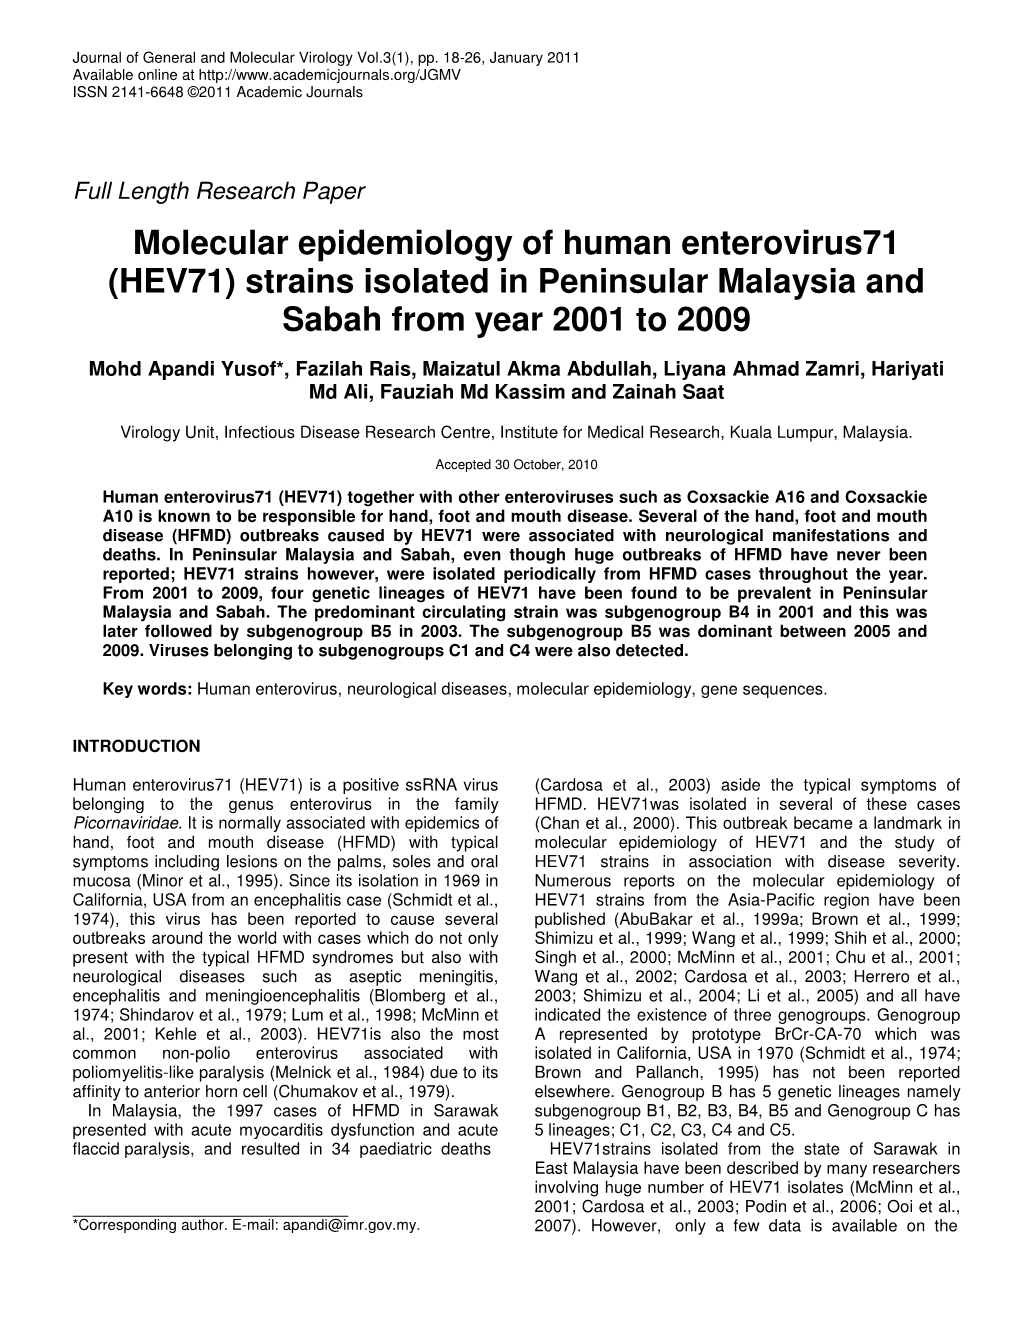 Molecular Epidemiology of Human Enterovirus71 (HEV71) Strains Isolated in Peninsular Malaysia and Sabah from Year 2001 to 2009